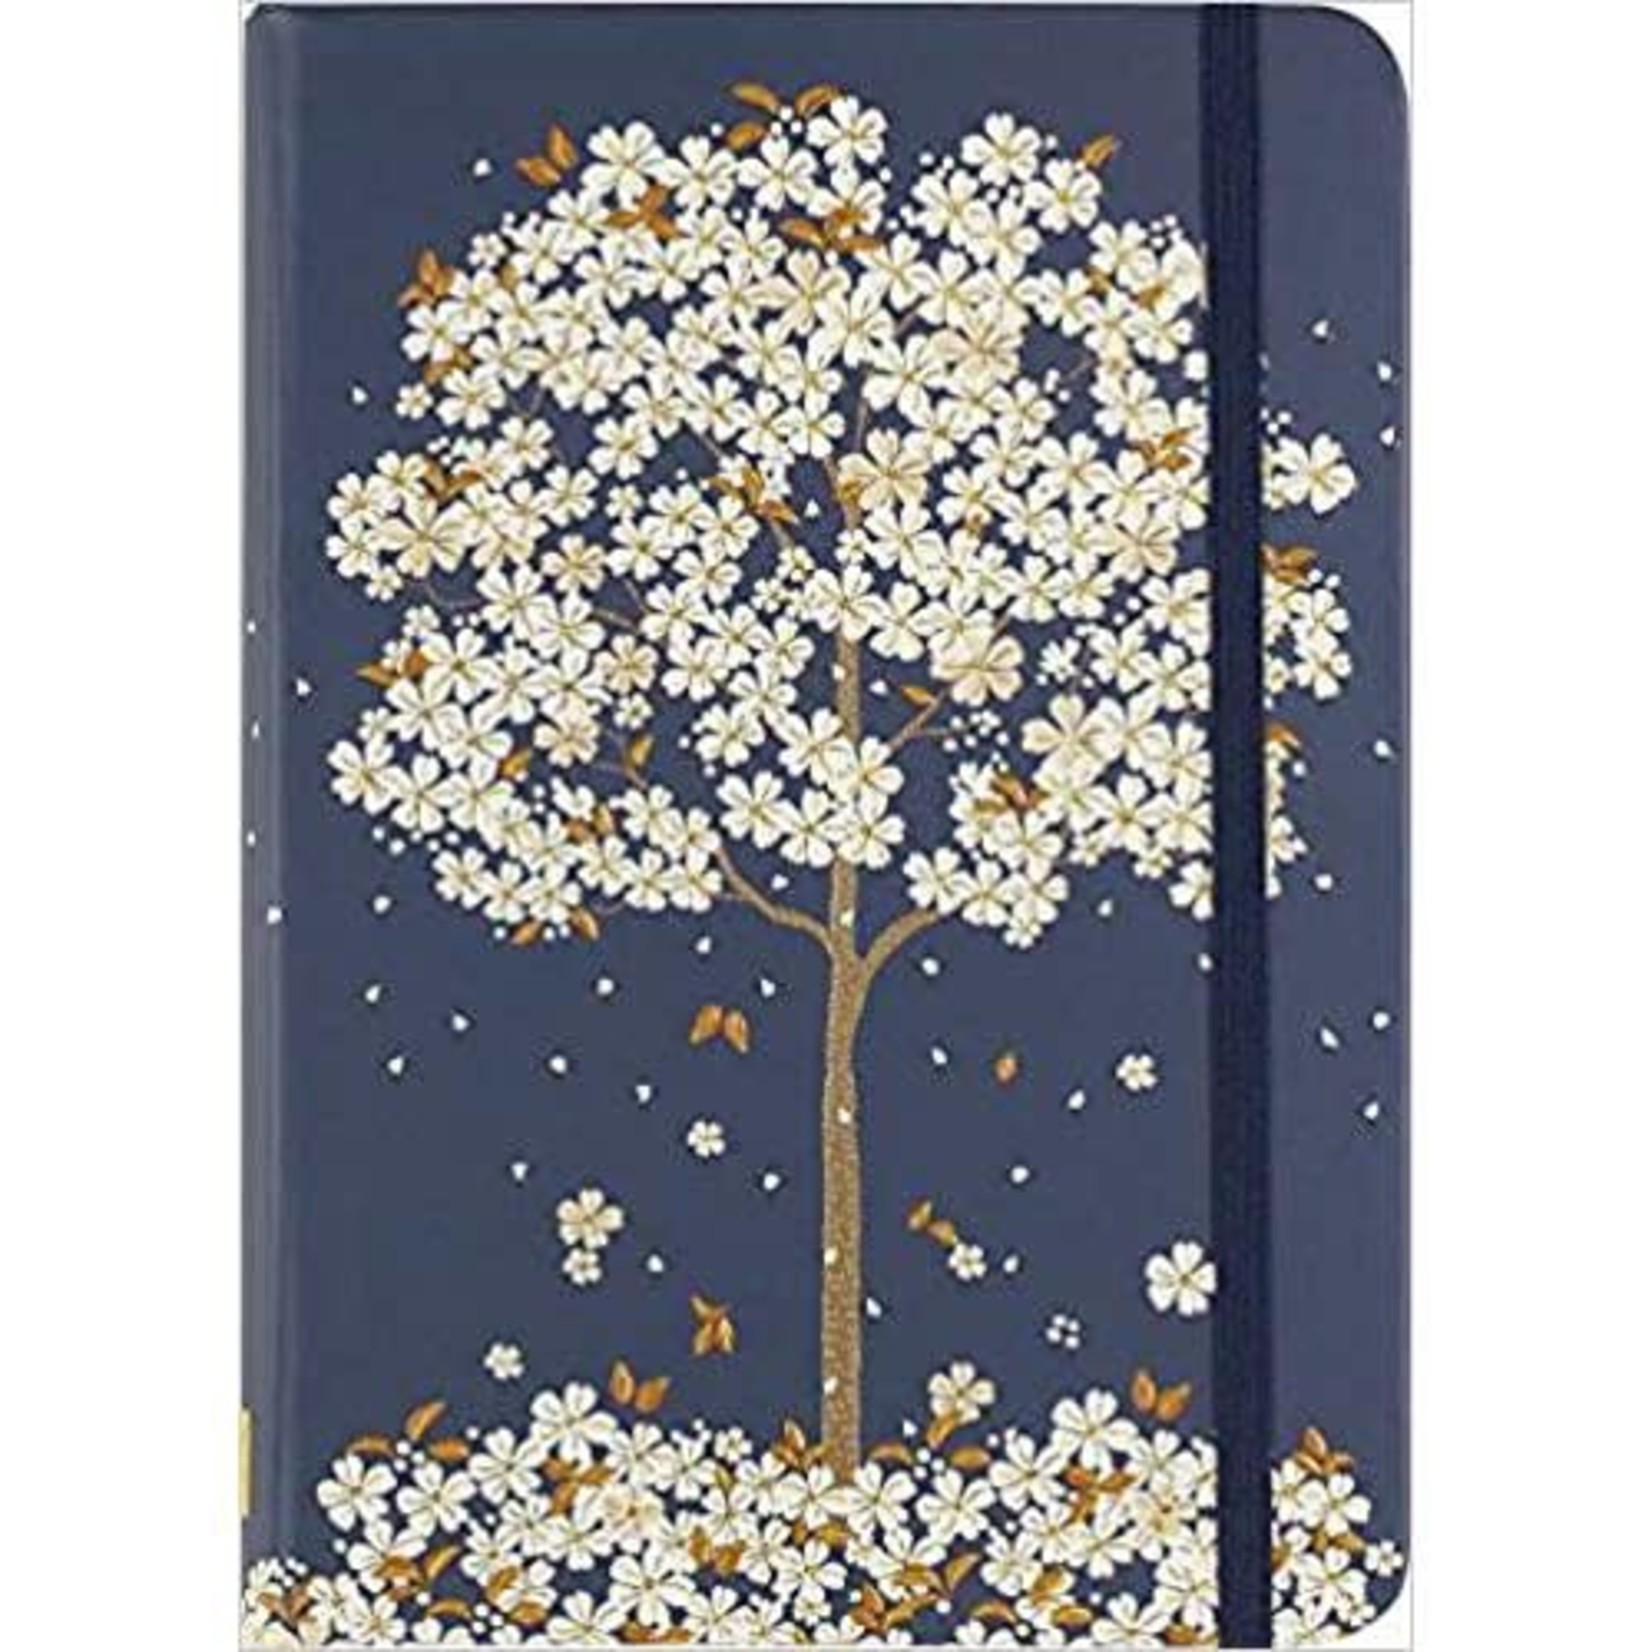 Falling Blossoms Journal / Diary / Notebook